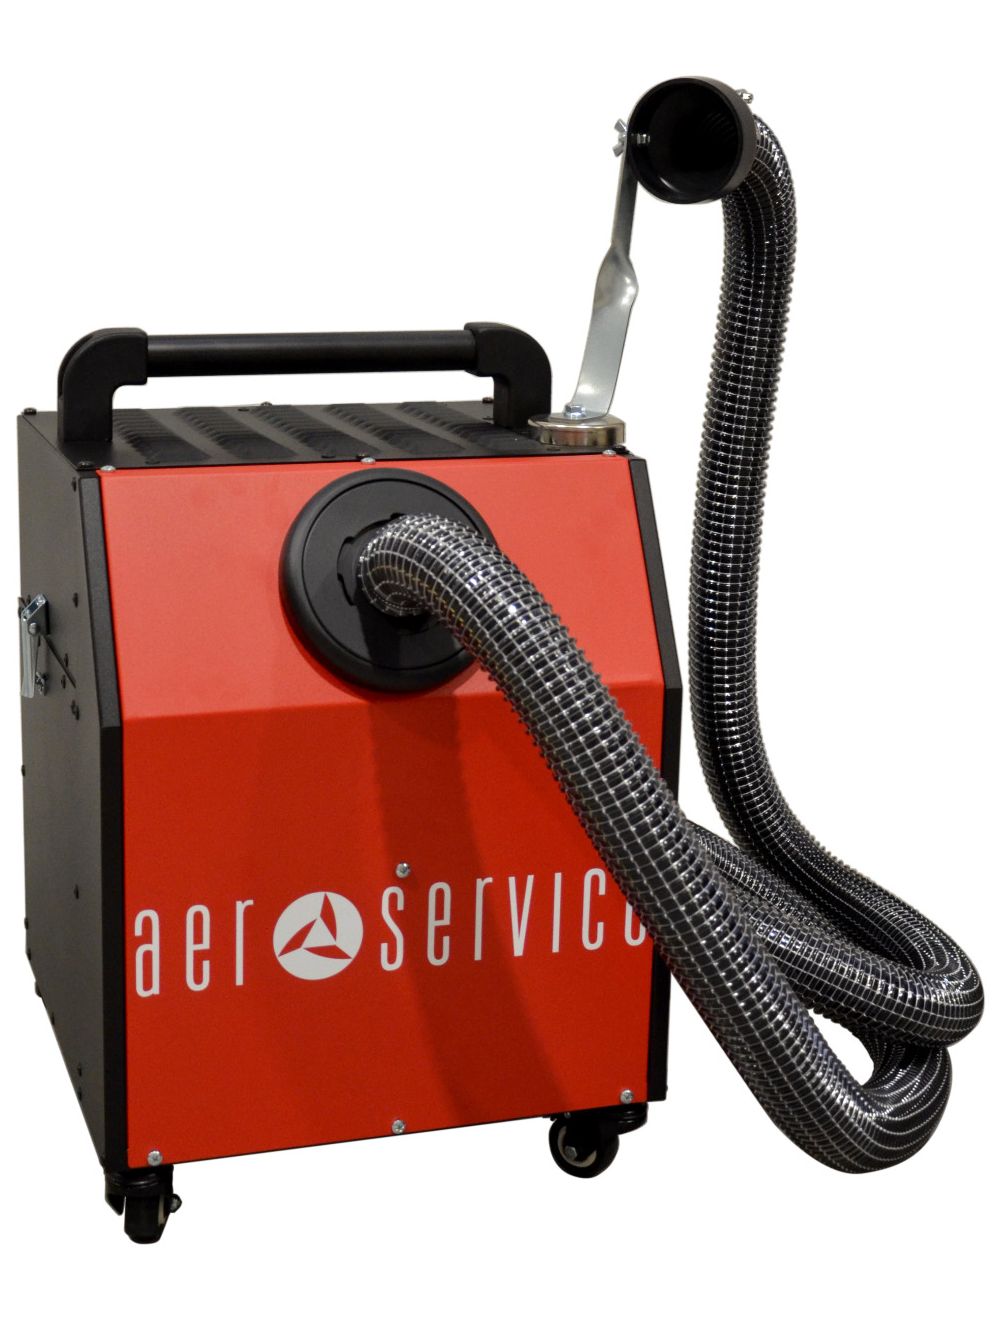 AER 40 - Pneumatic portable filter unit for welding fumes